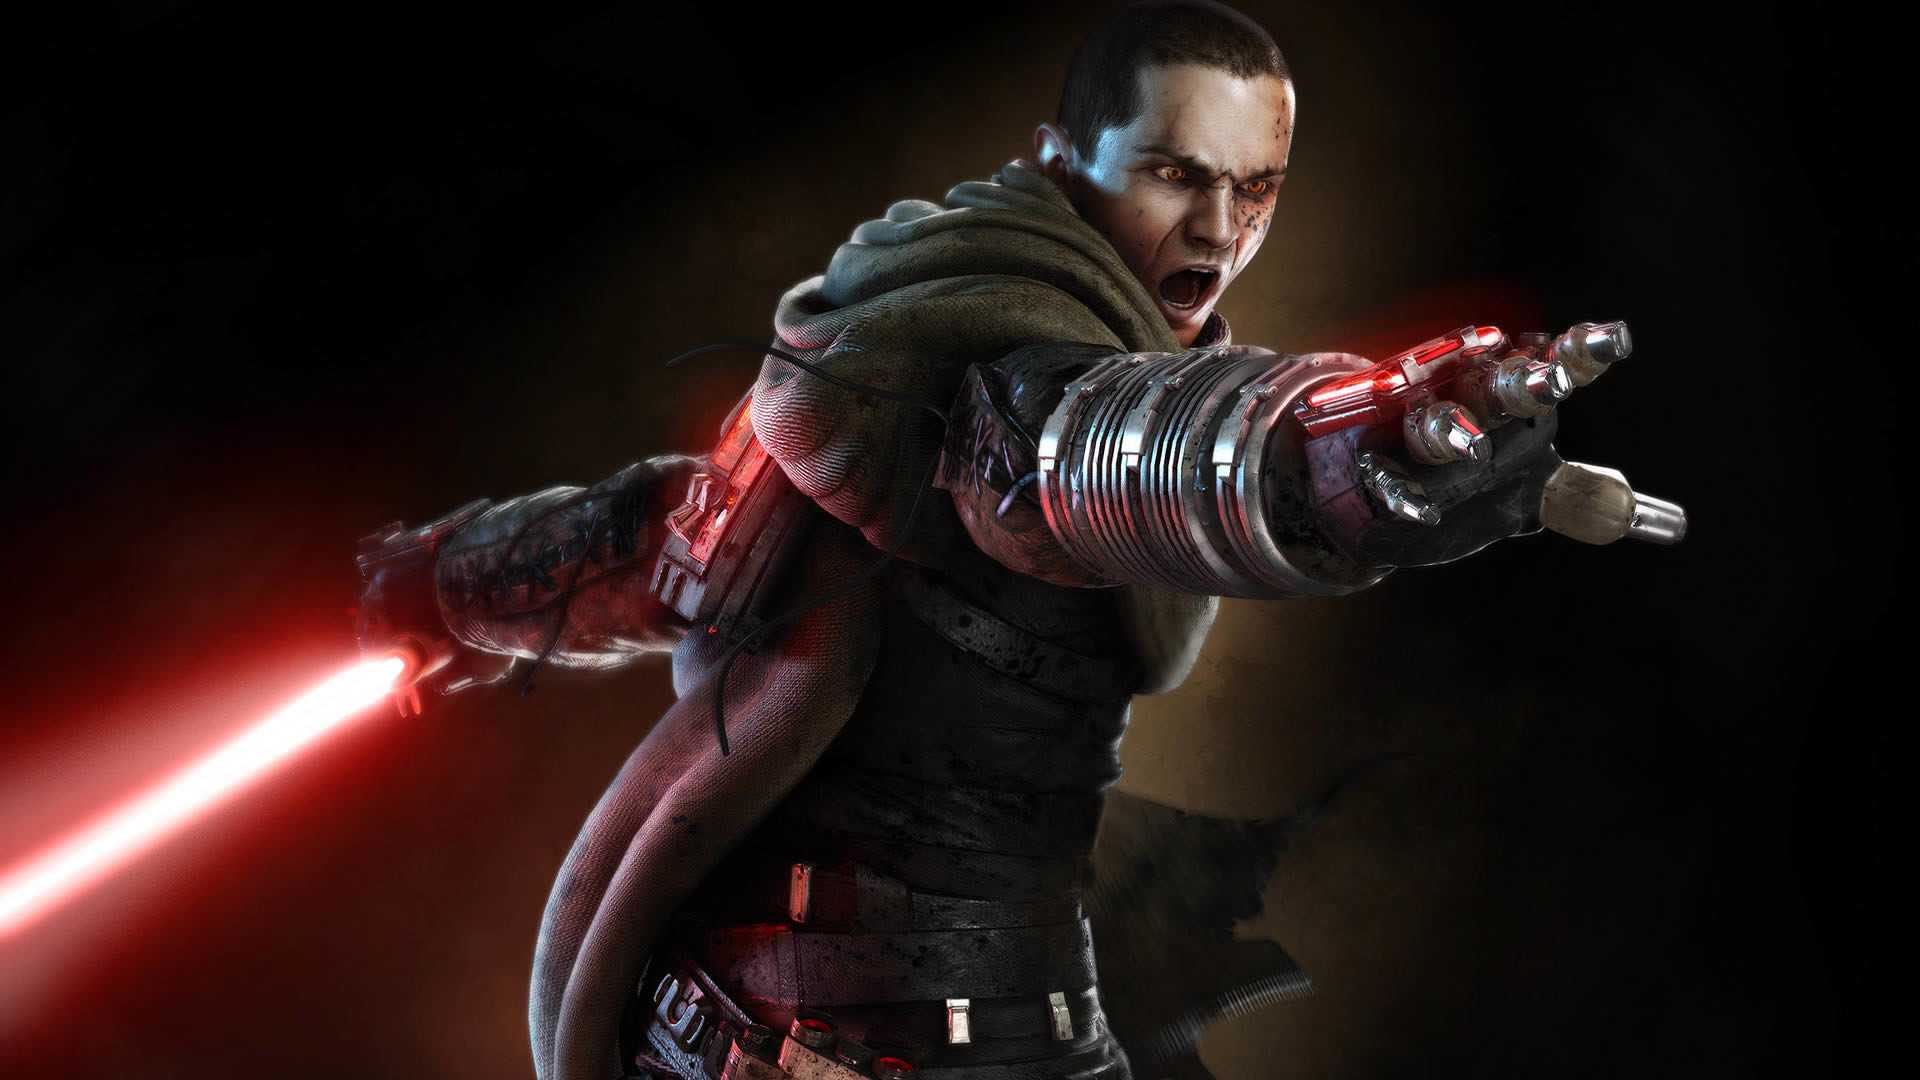 Full size image force unleashed wallpaper